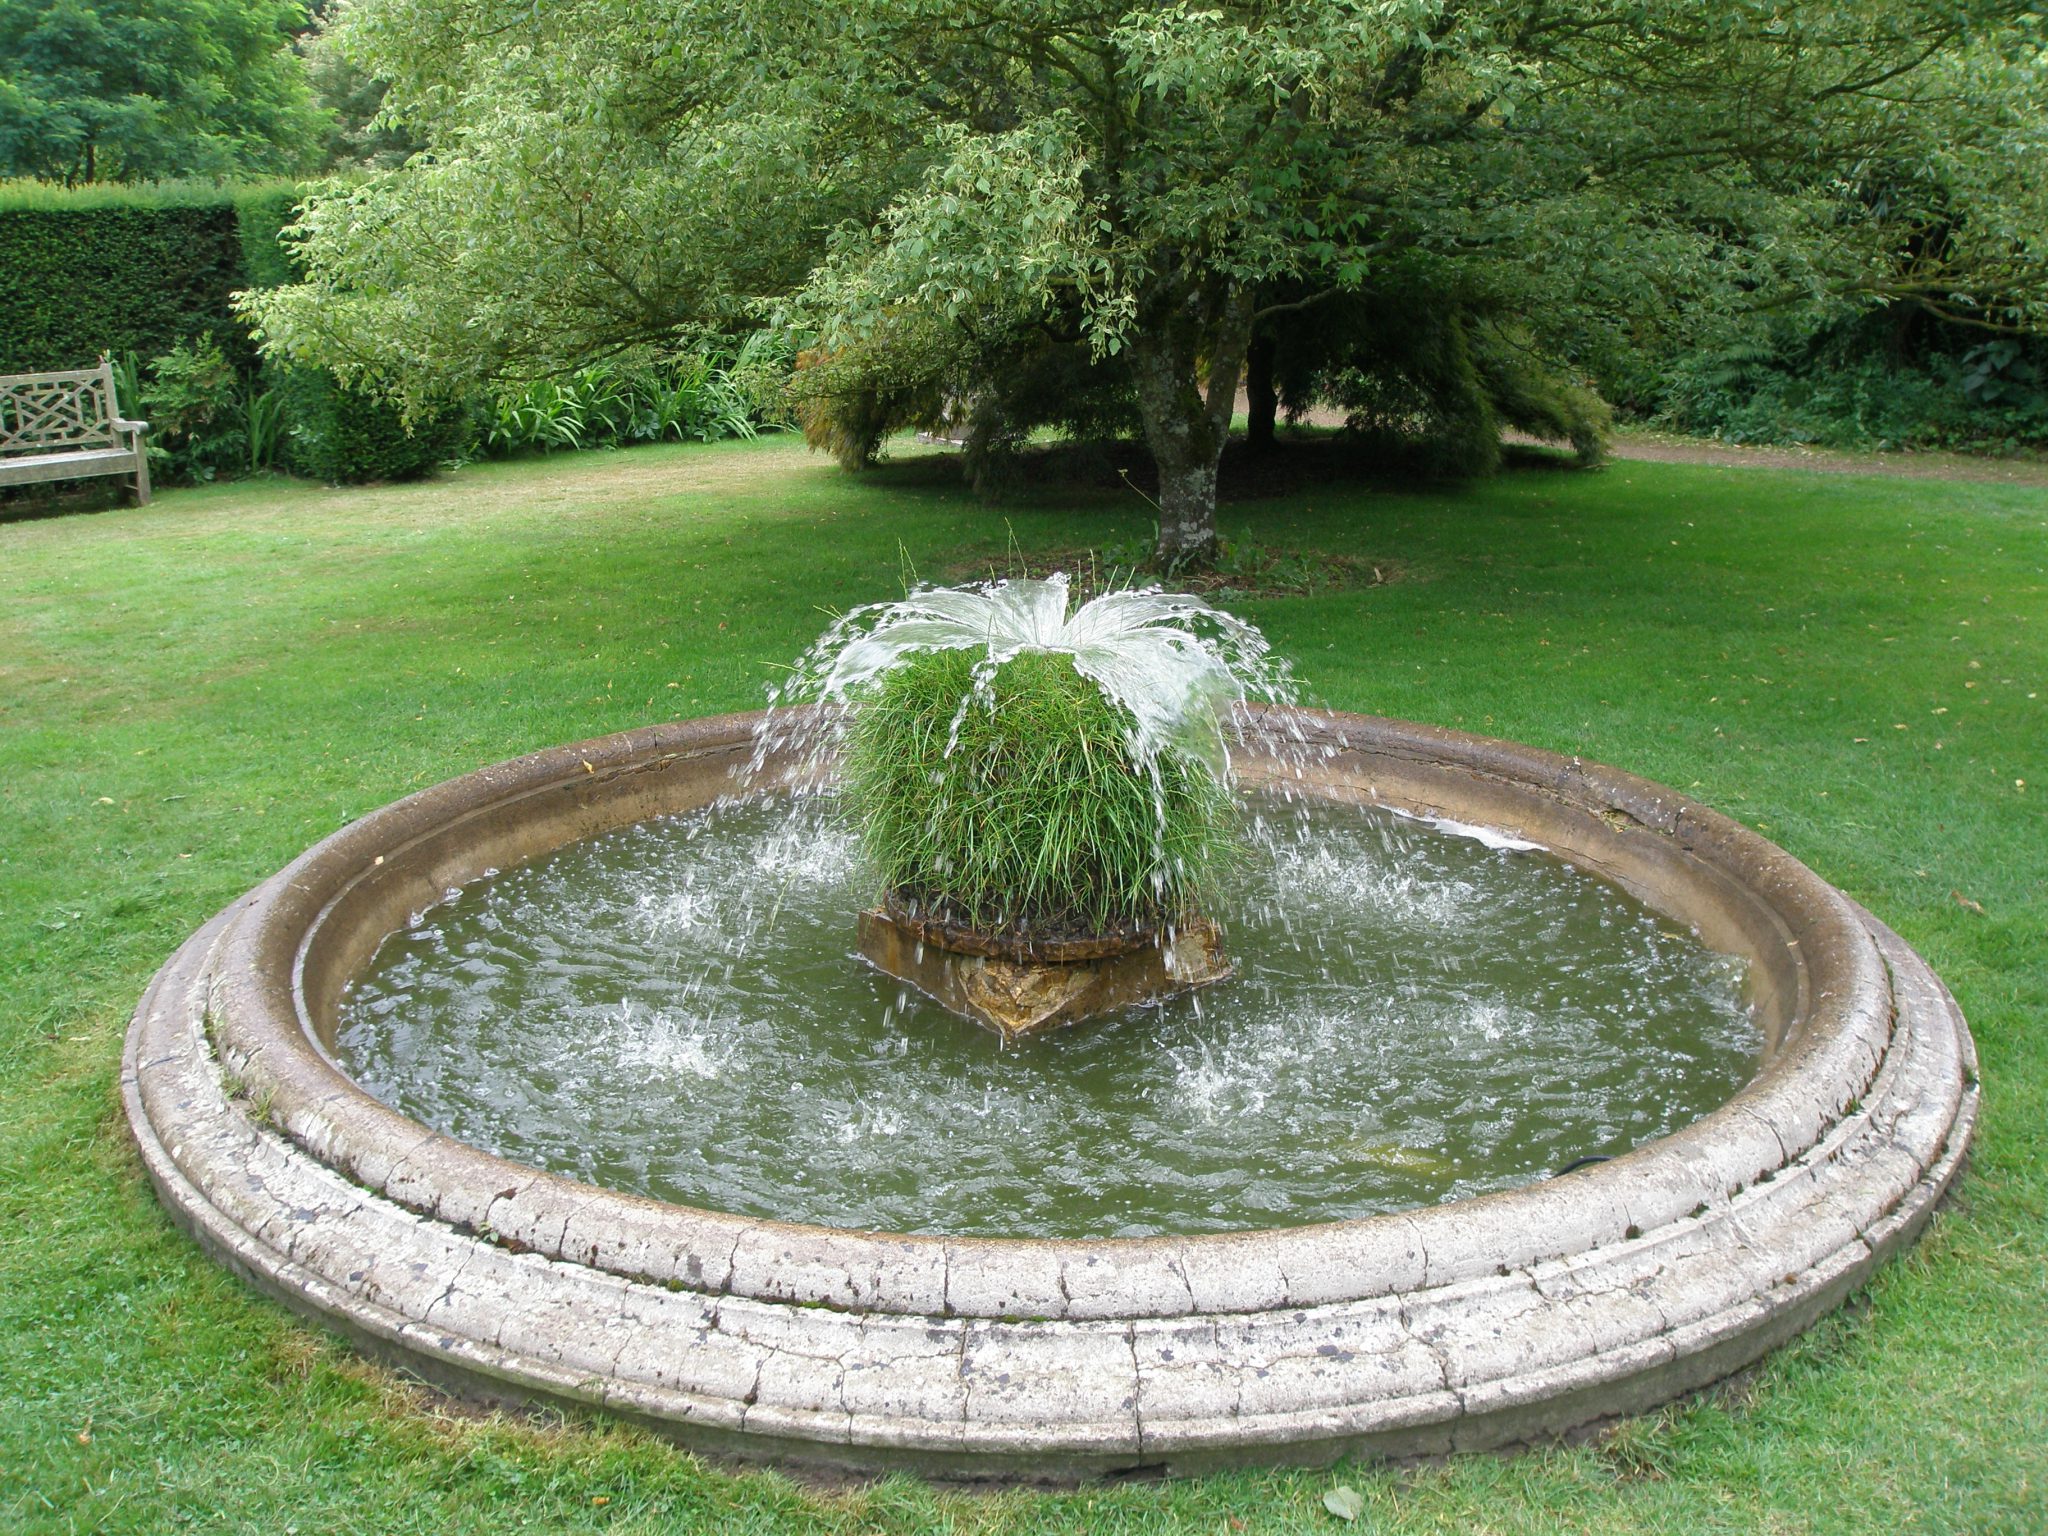 The Oriental Garden is centered upon a pool, with an unusual grass fountain.